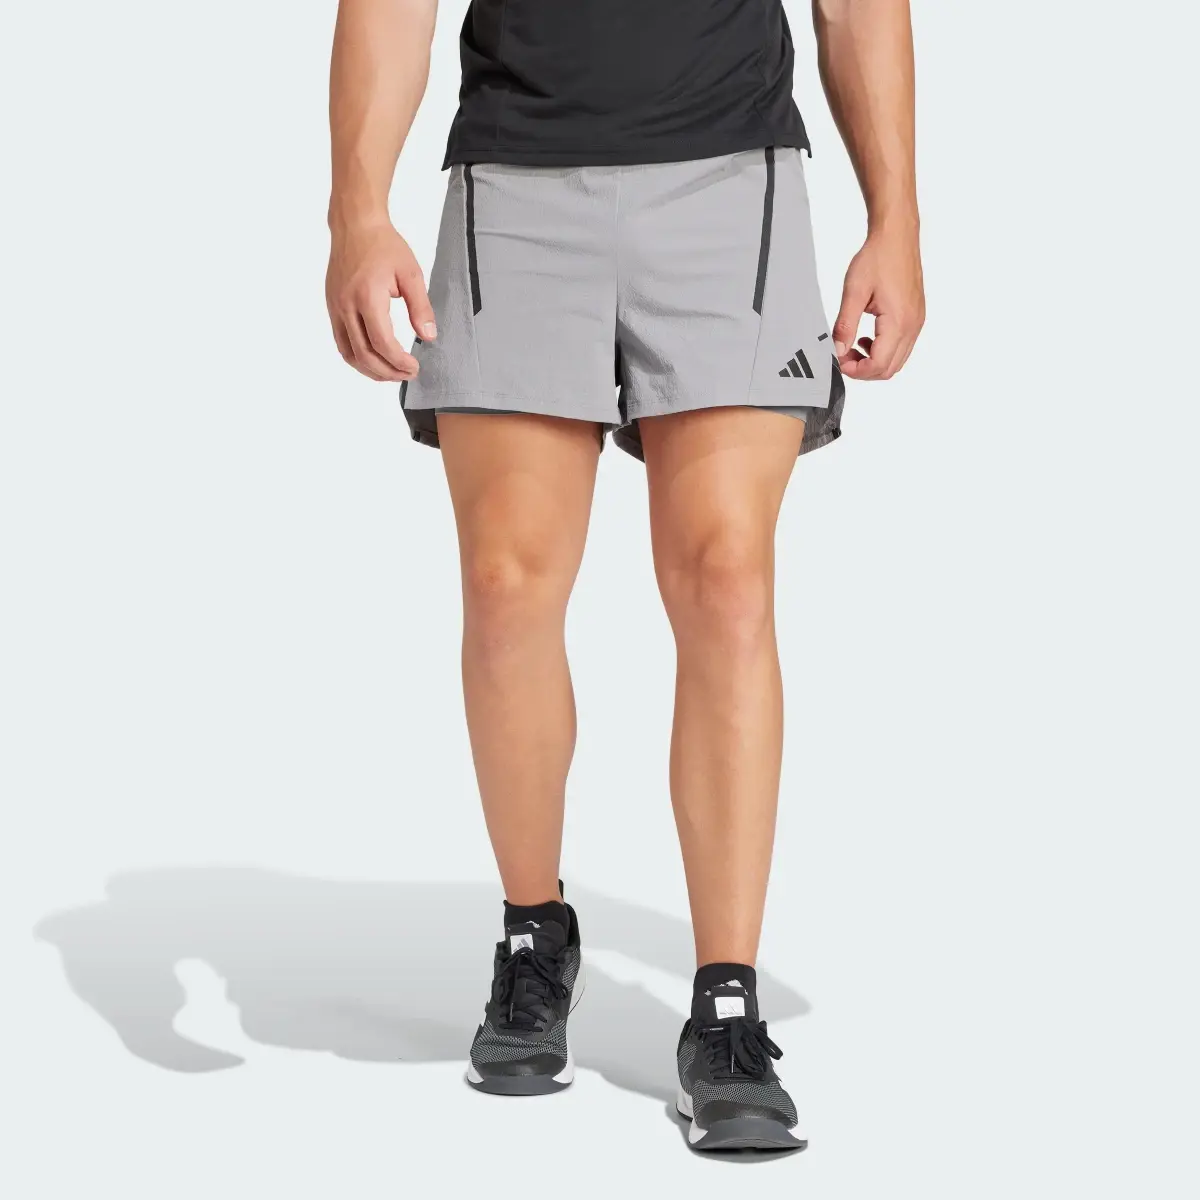 Adidas Designed for Training Pro Series Adistrong Workout Shorts. 1